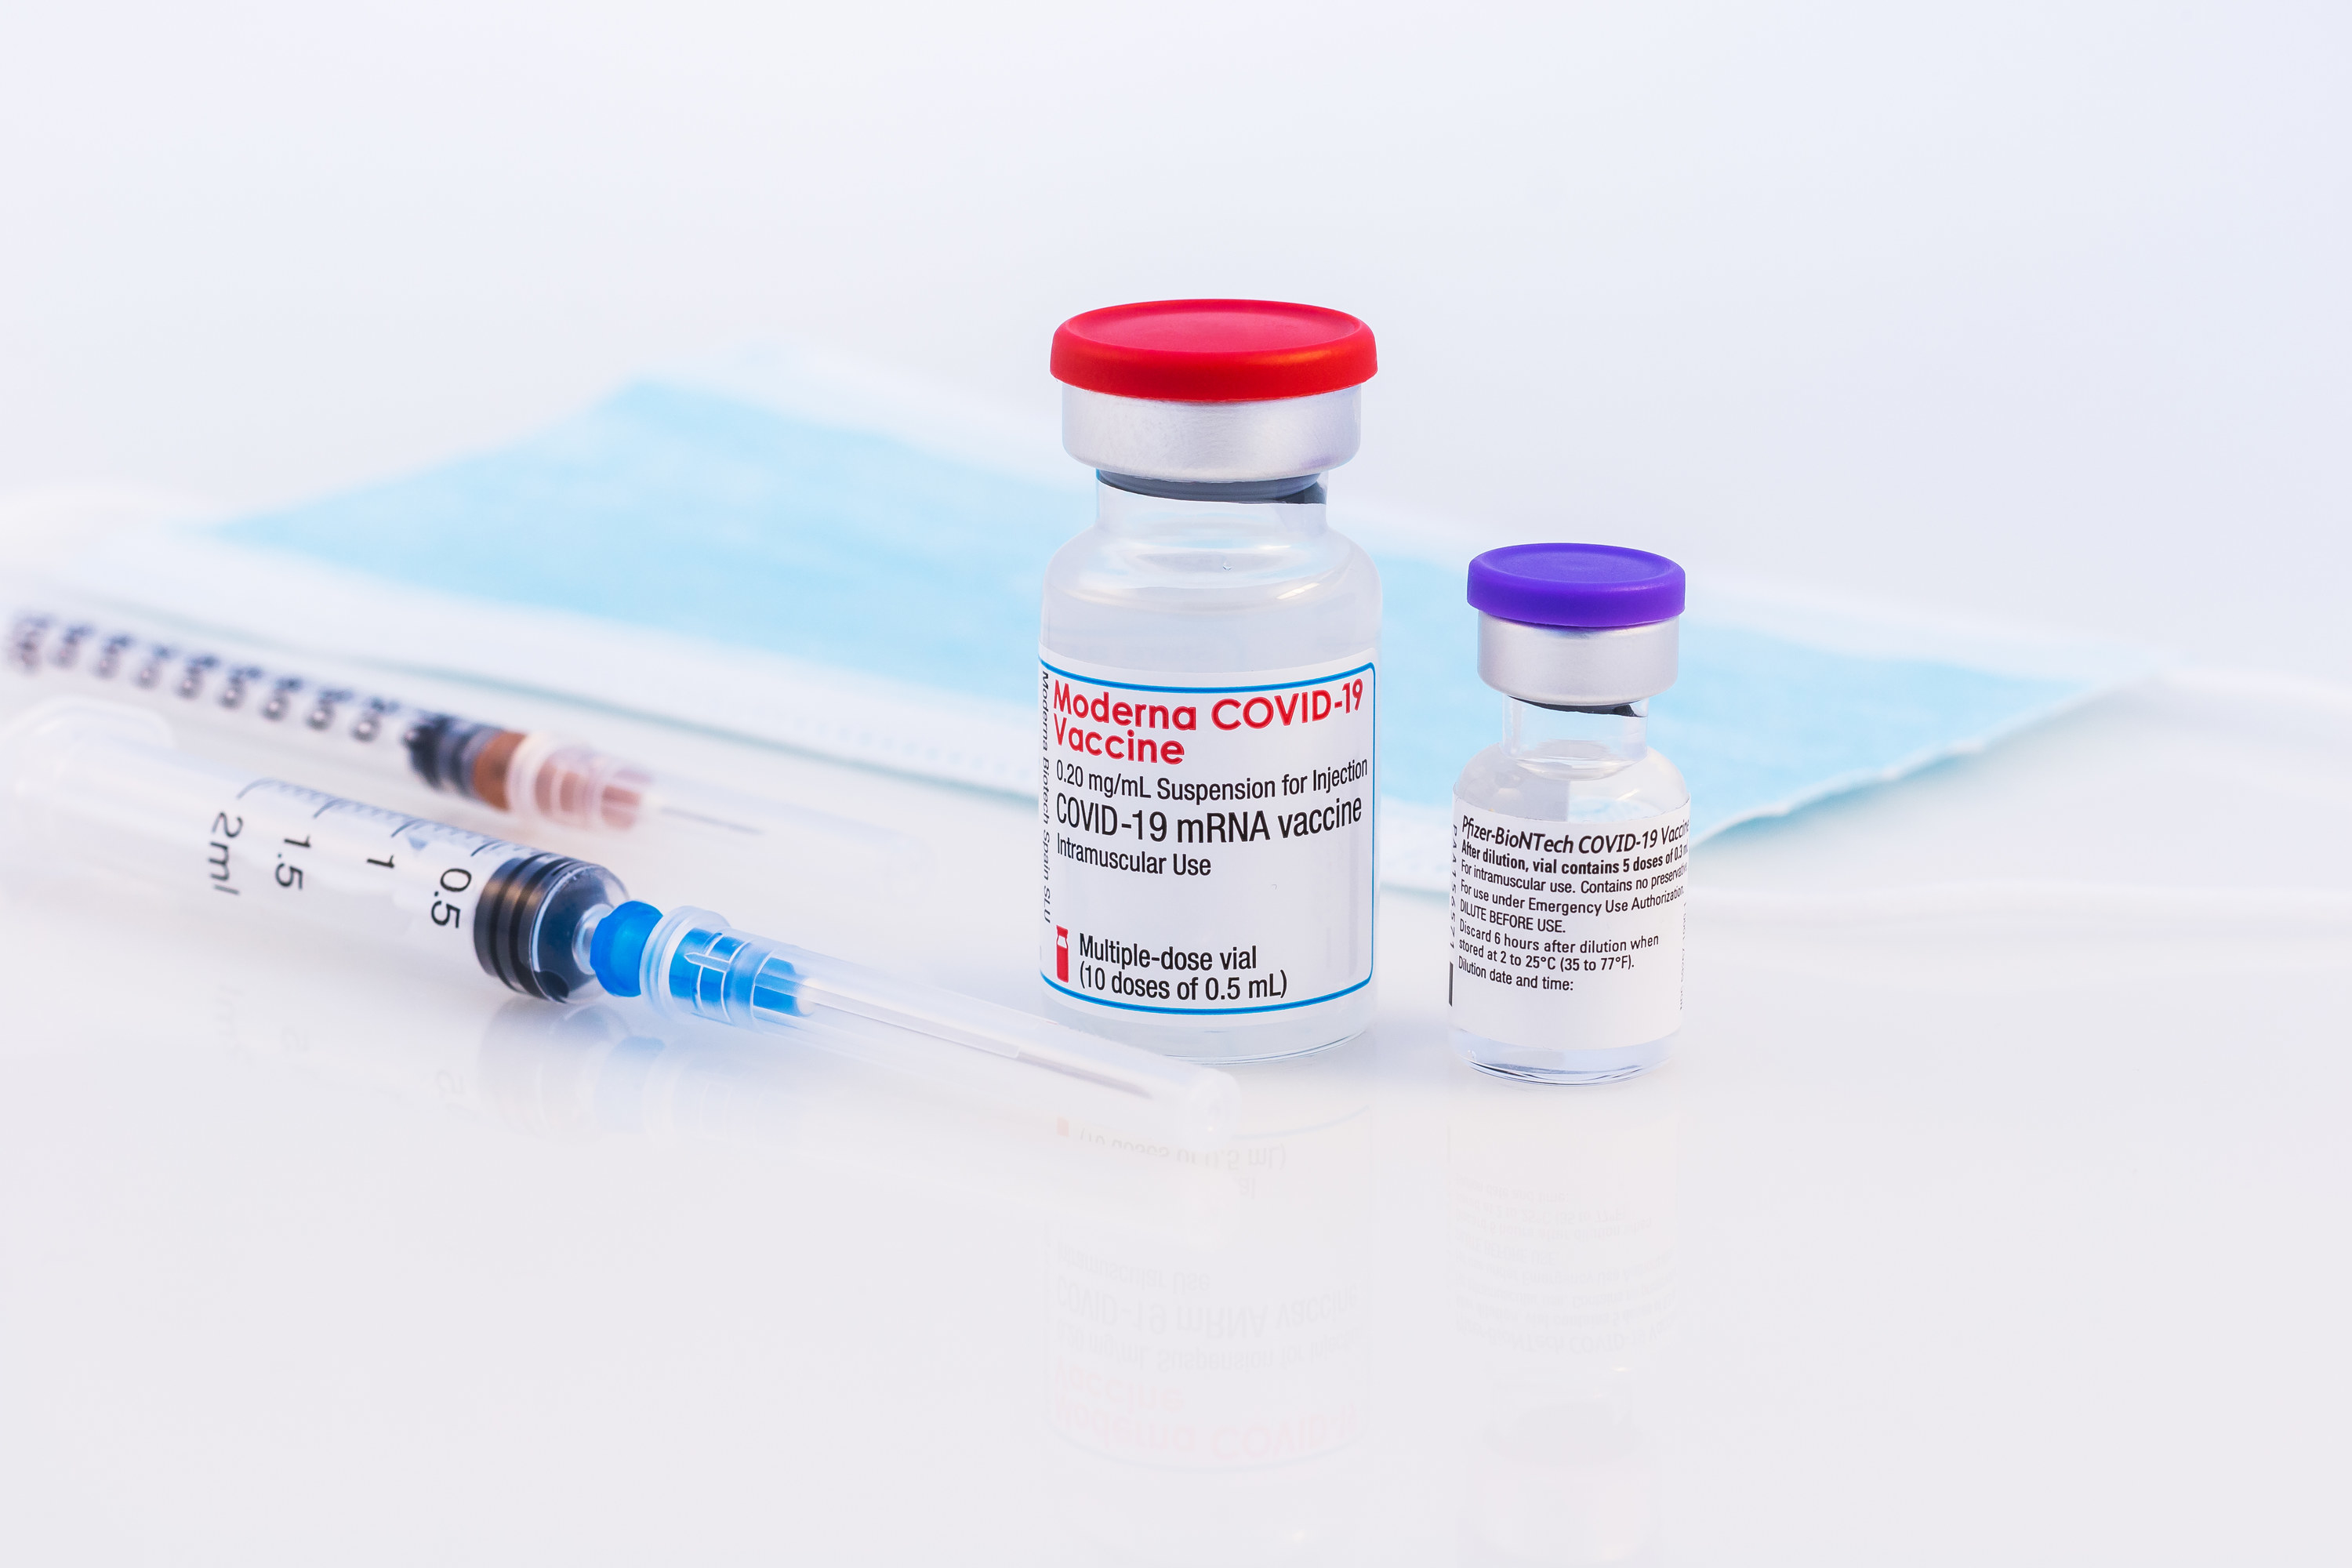 A bottle of the Moderna COVID-19 Vaccine next to two syringes and a surgical face mask